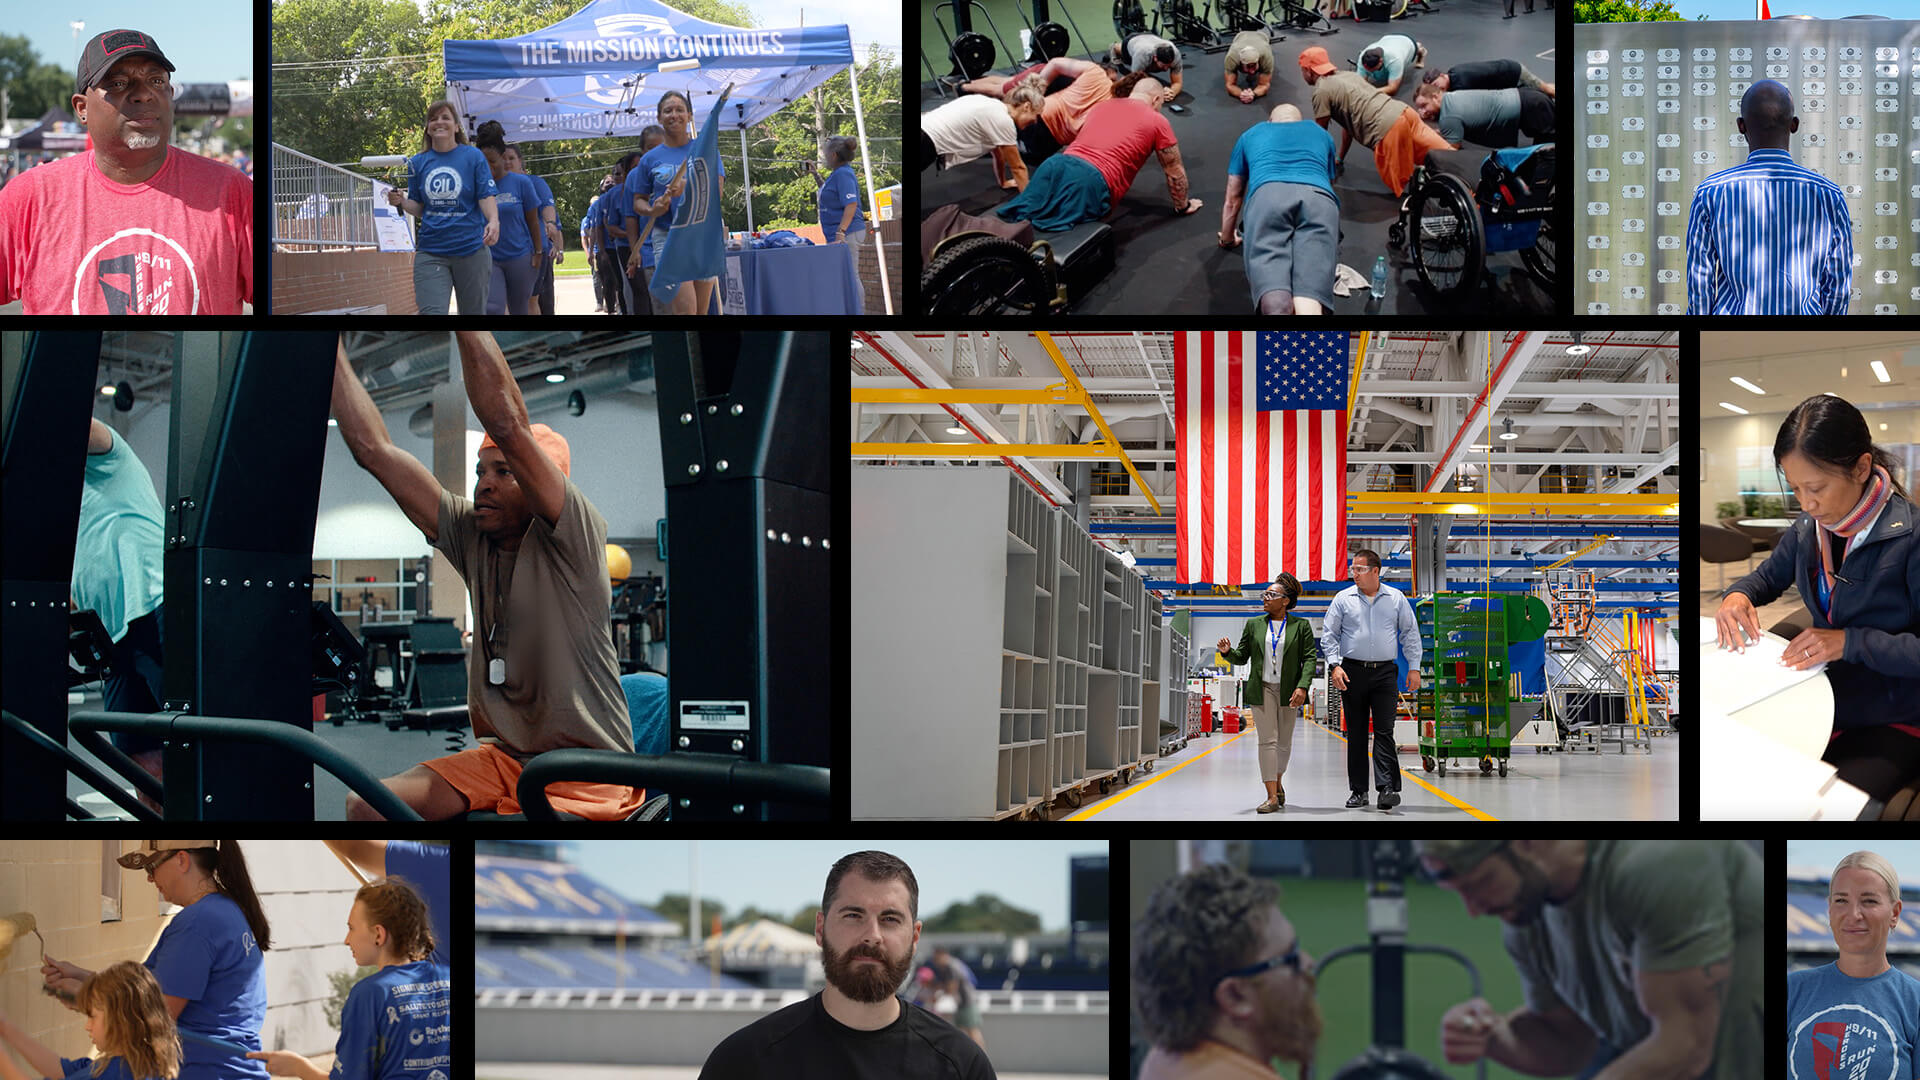 Video: Supporting Our Veterans and Their Communities